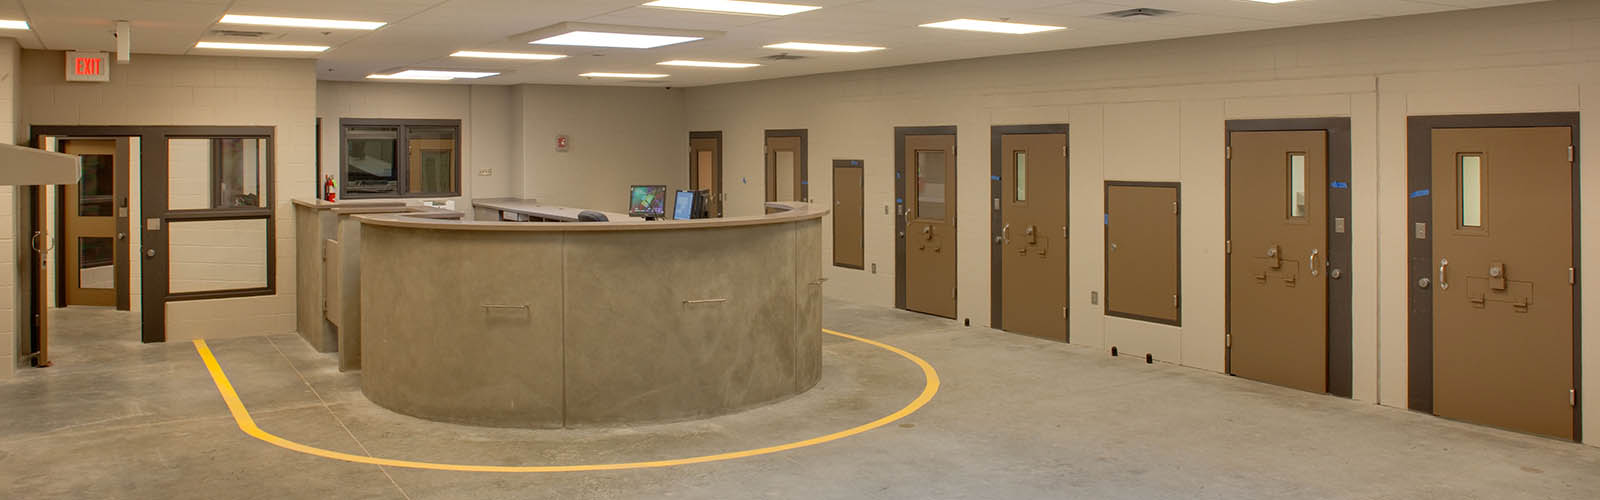 Ford County Jail and Sheriff’s Office Redesign HMN Architects